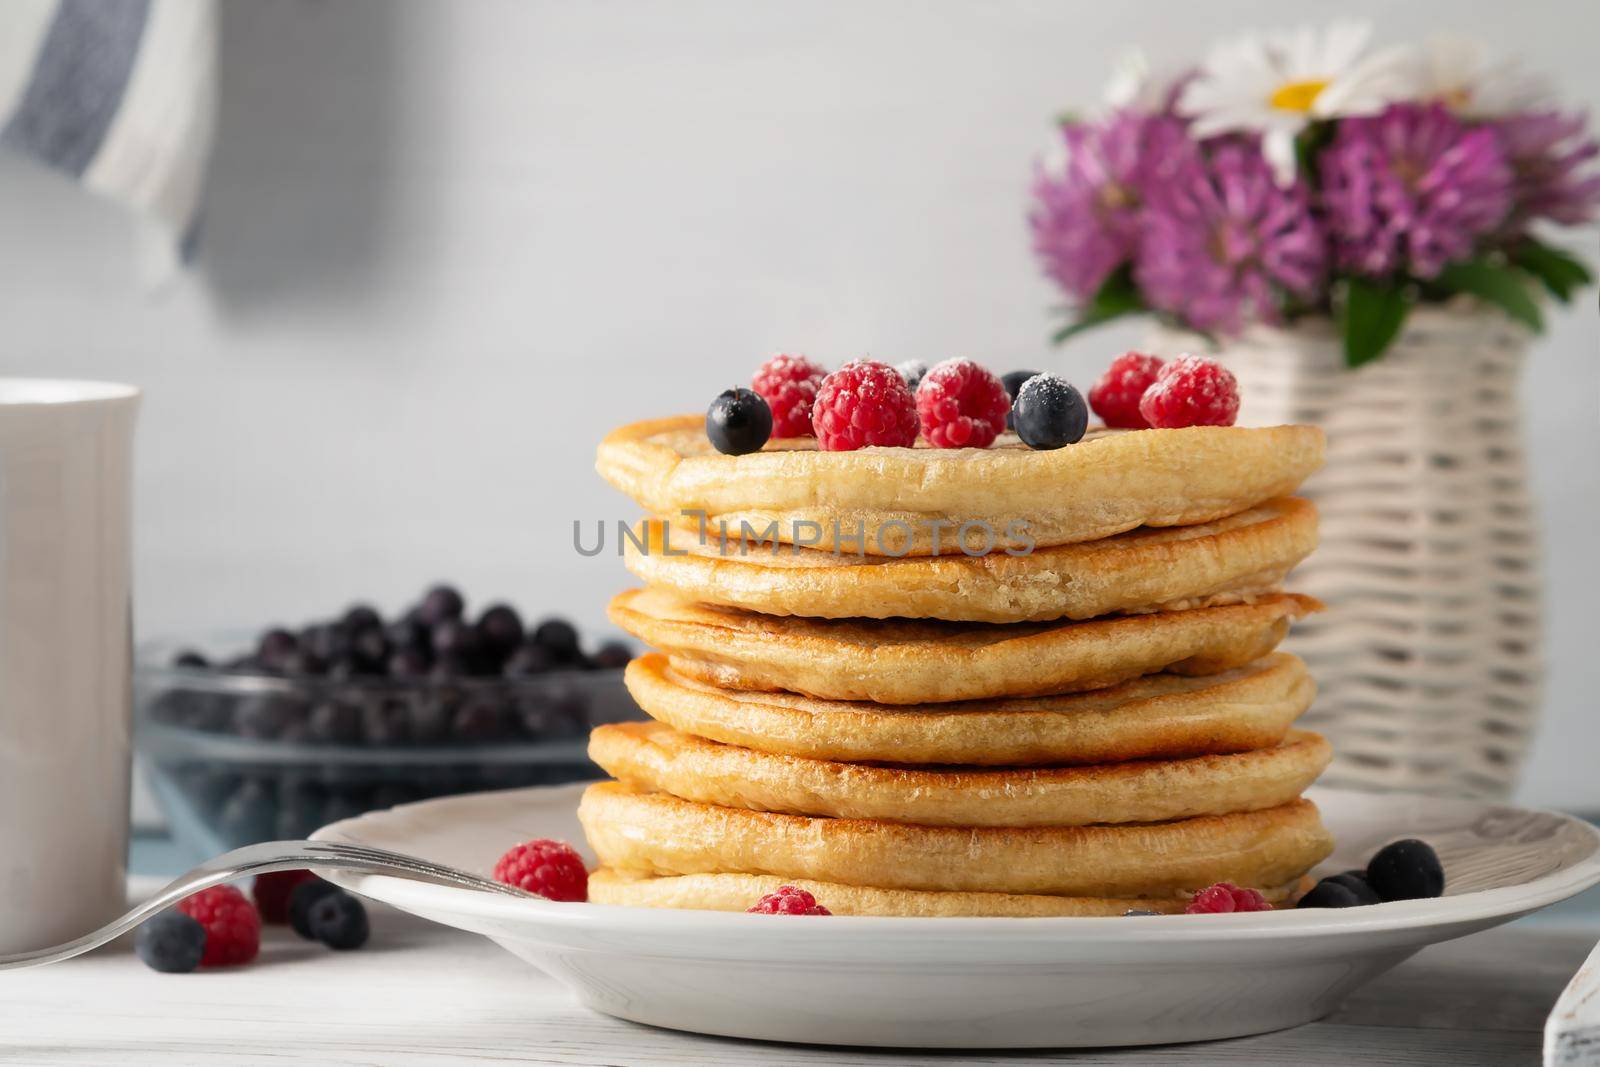 Stack of pancakes with fresh berries on a white plate and a vase of wildflowers on the table.